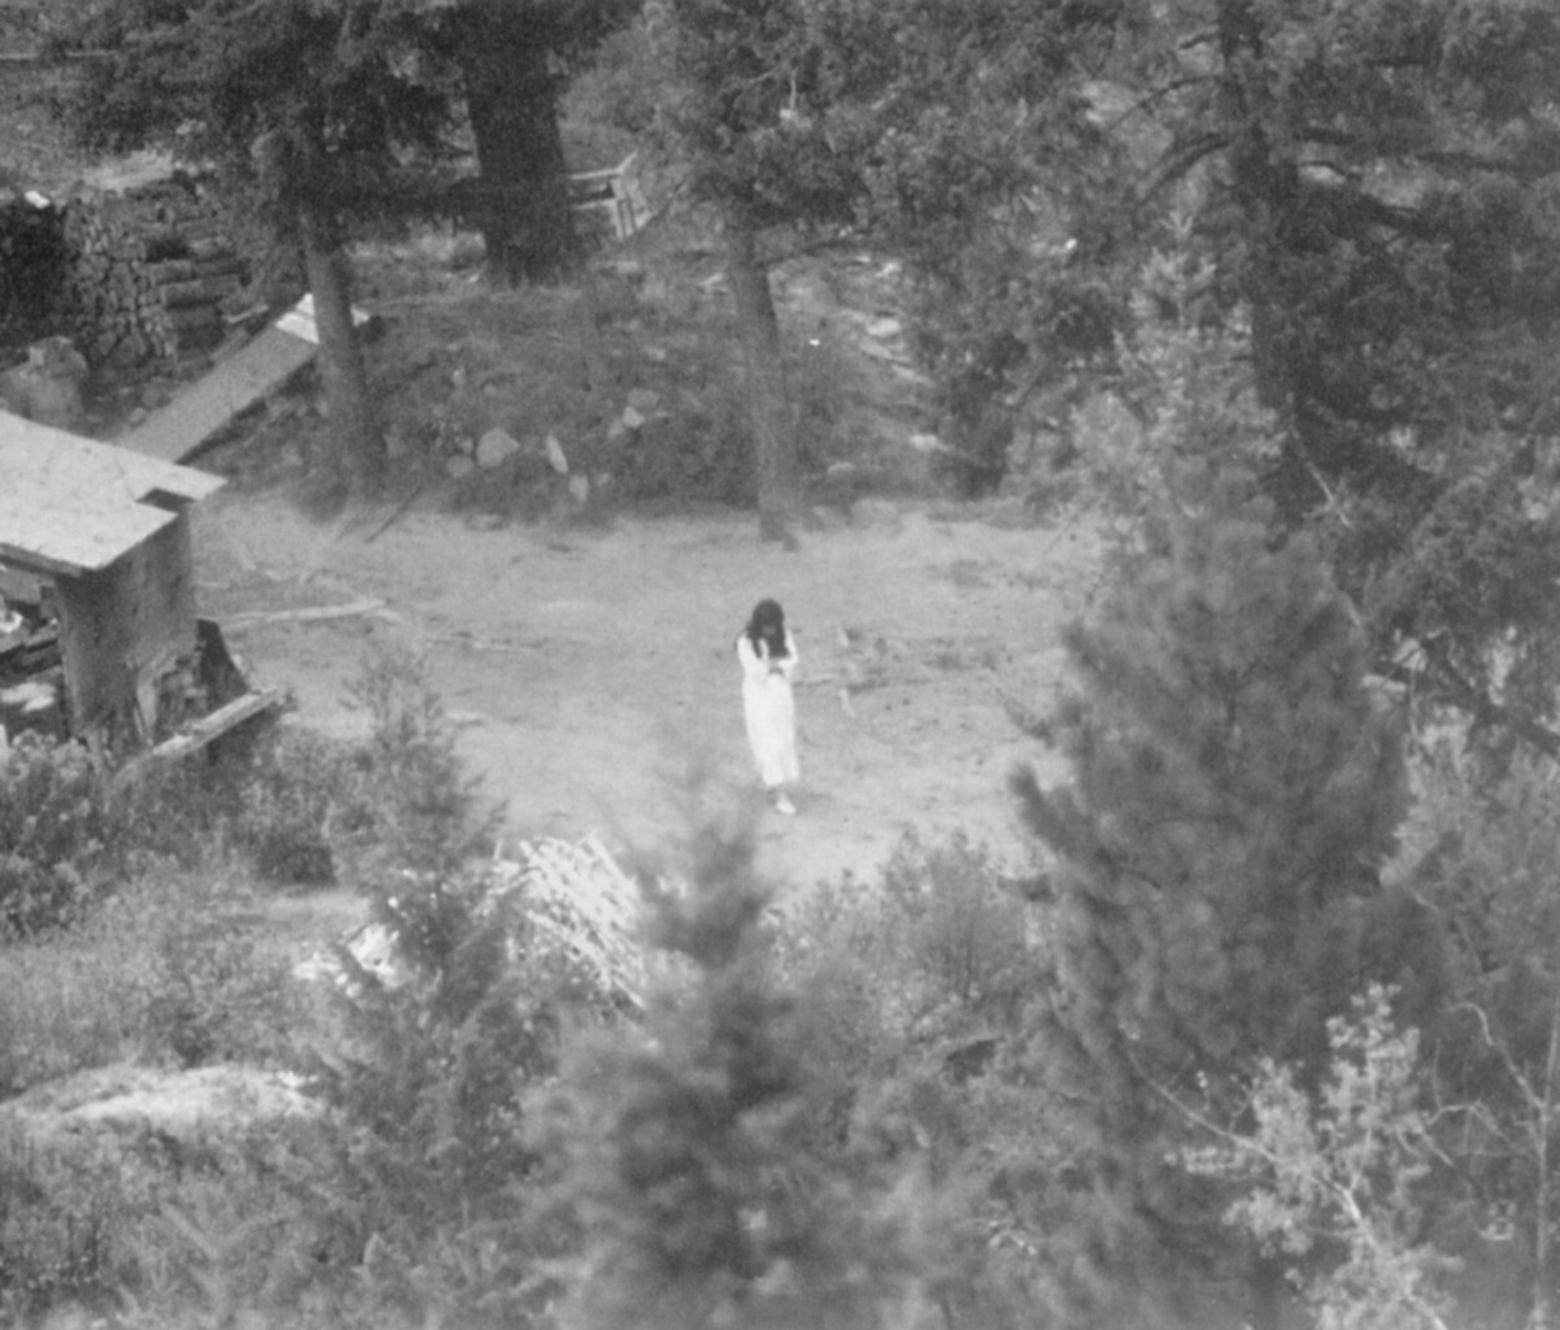 This photograph, taken with a surveillance camera used by the US Marshall Service, is believed to be the last picture of Vicki Weaver before she was killed by an FBI sniper on Aug. 22, 1992 in the Ruby Ridge, Idaho standoff. It was introduced in evidence at a subsequent trial involving surviving husband, Randy Weaver.